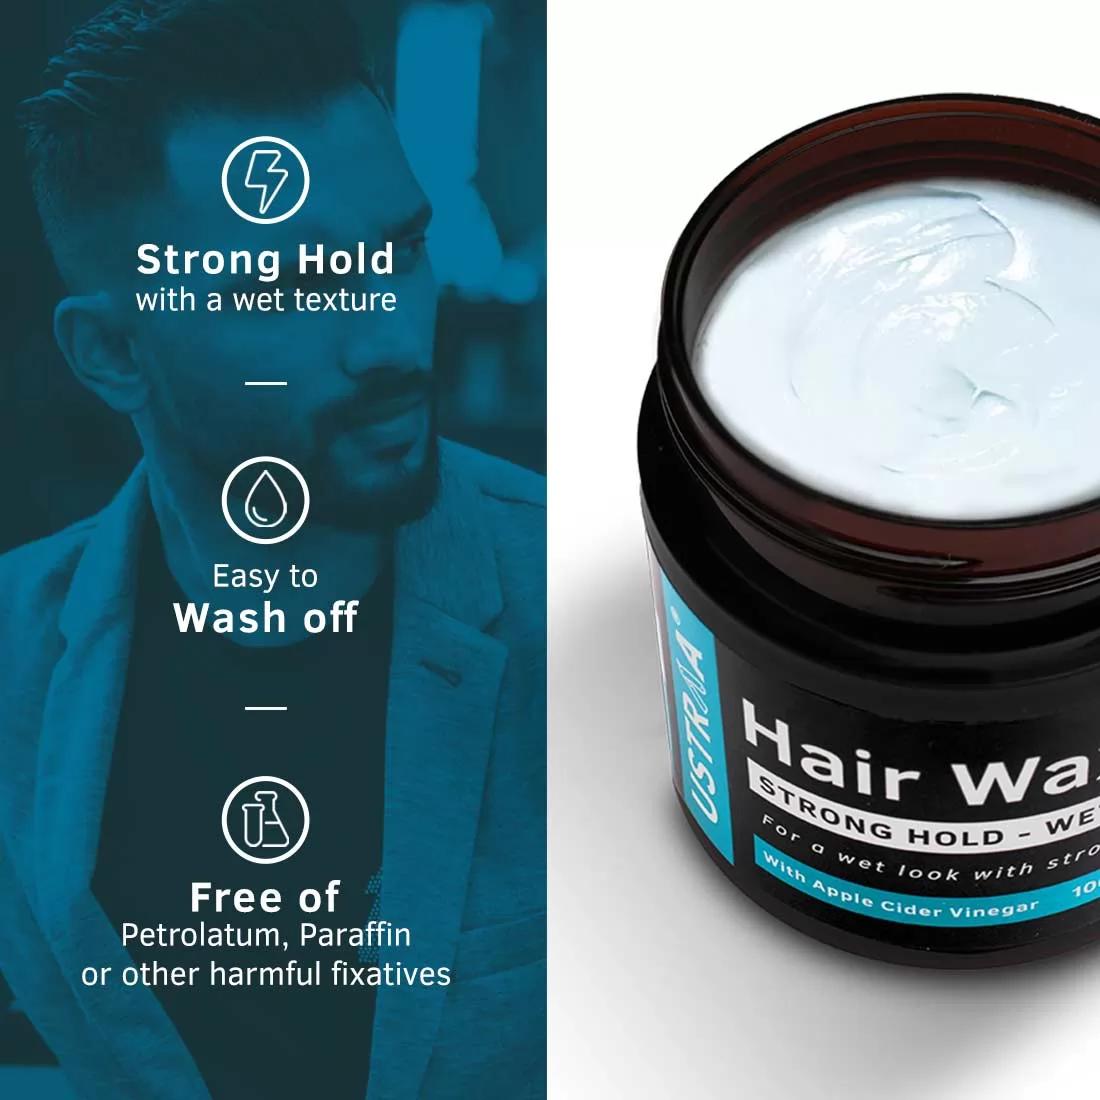 Strong Hold with Wet Look | No Harmful Chemicals |Hair Wax Wet Look |Ustraa